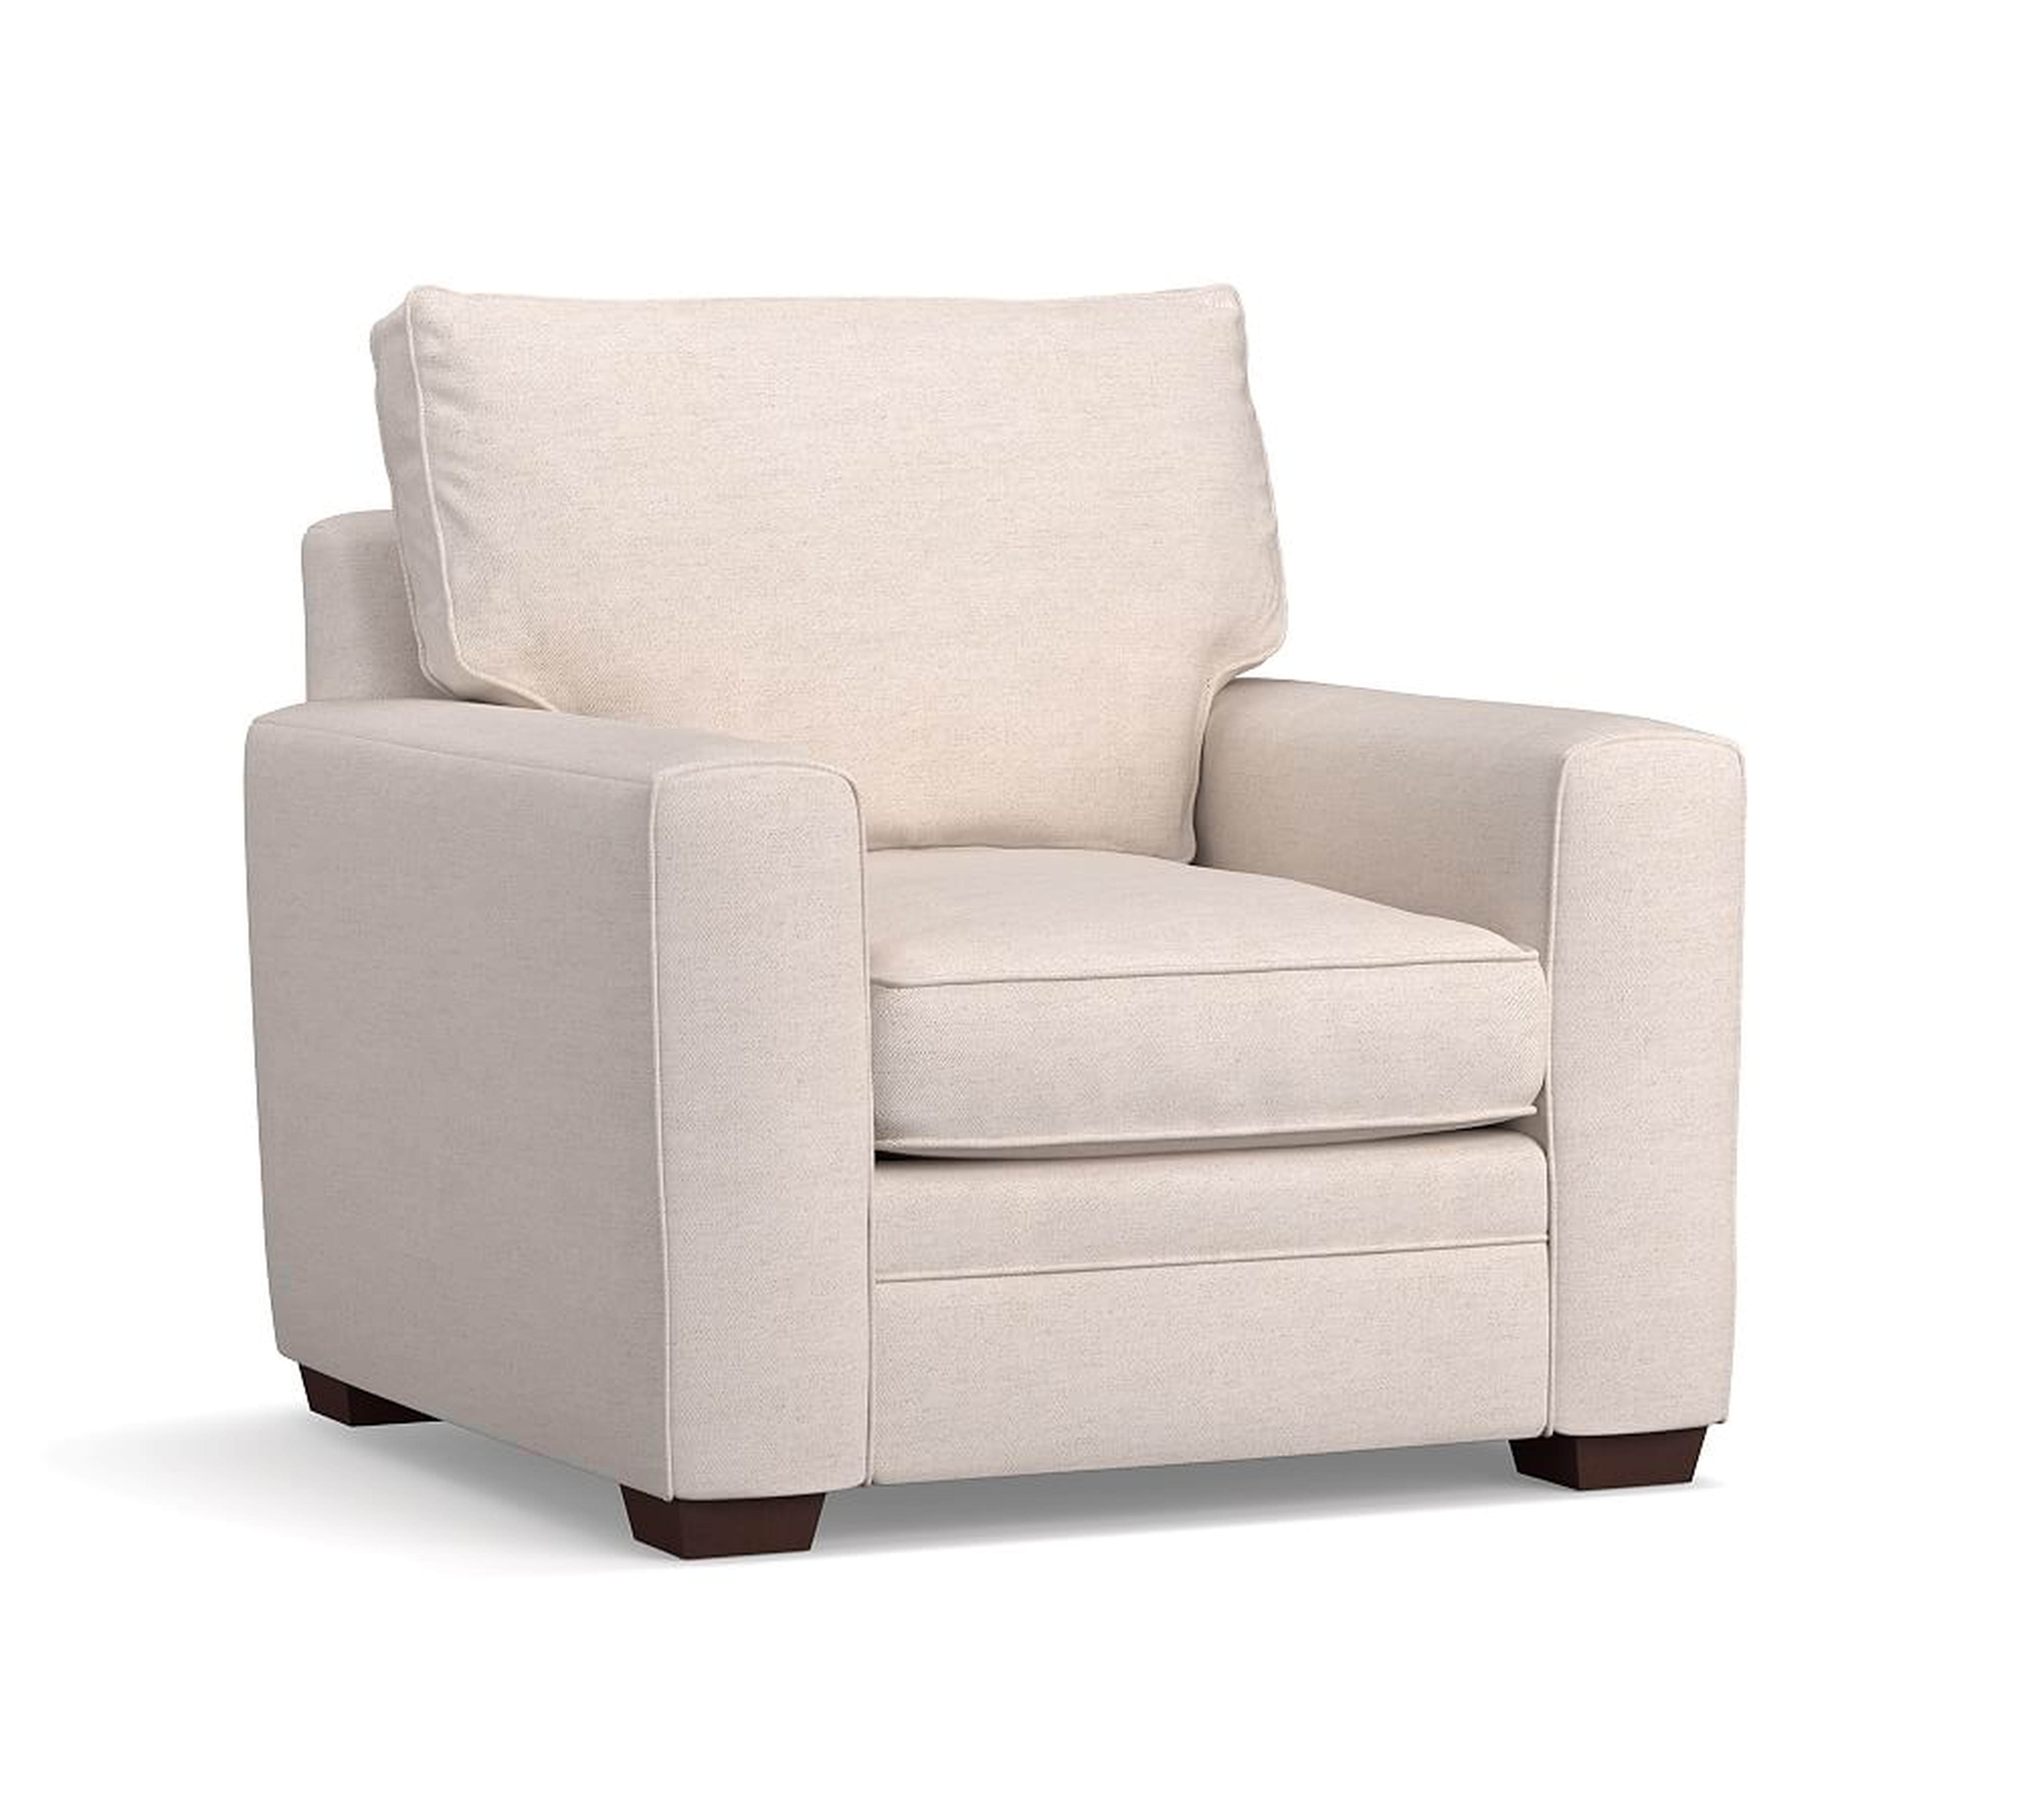 Pearce Square Arm Upholstered Armchair, Down Blend Wrapped Cushions, Performance Heathered Basketweave Dove - Pottery Barn